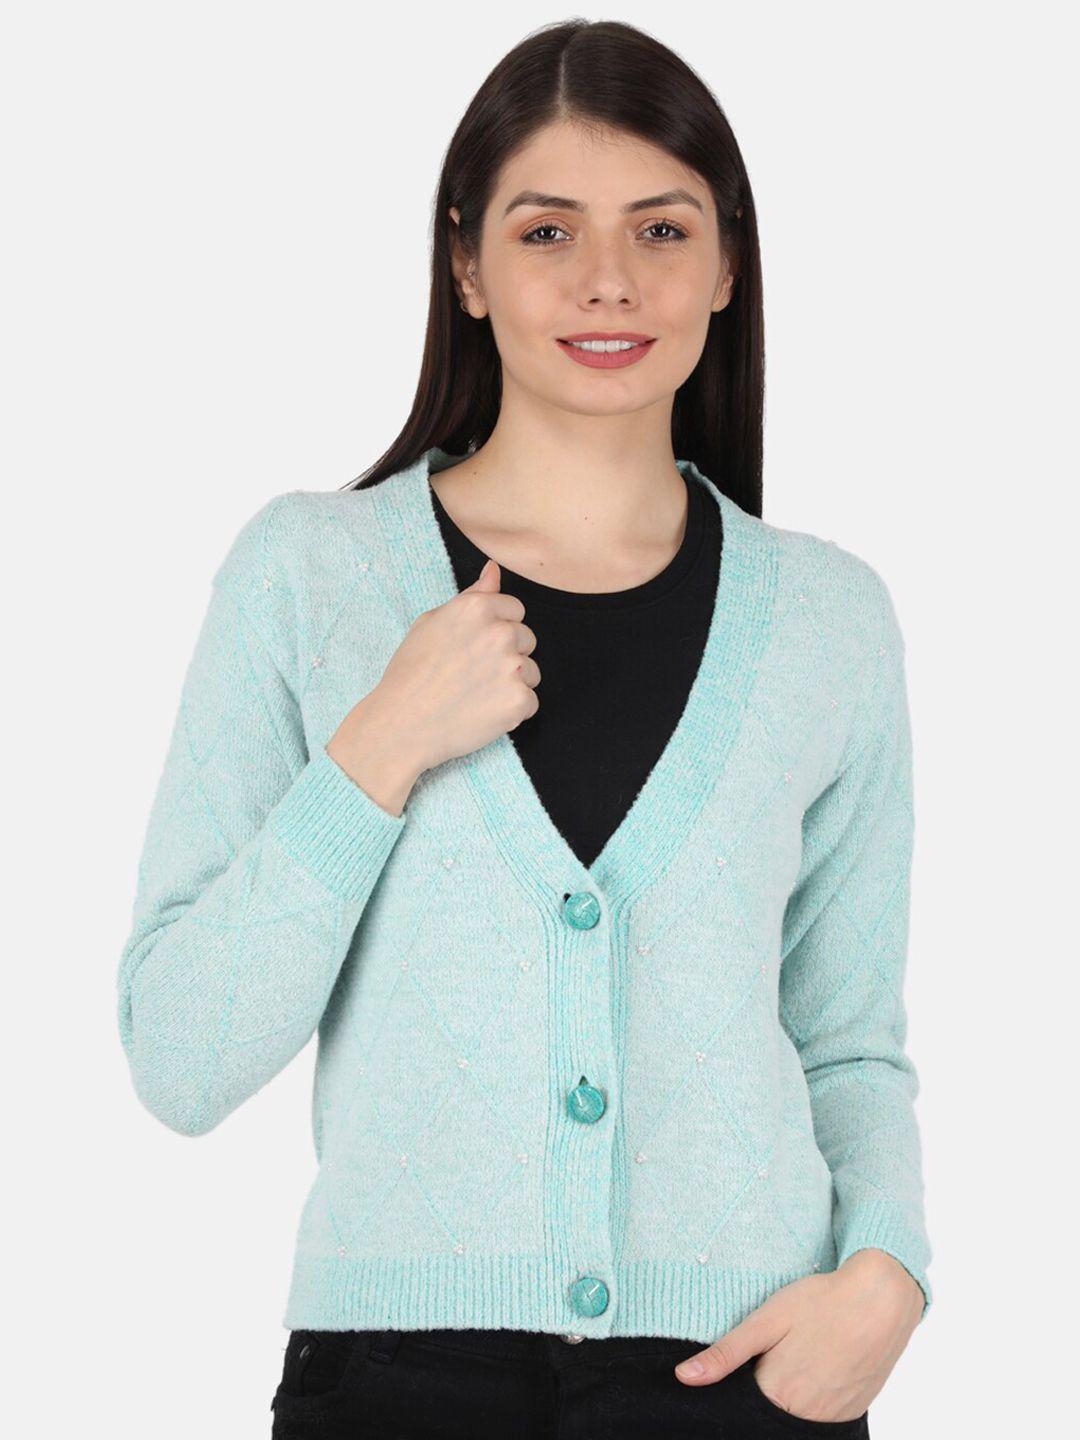 monte carlo women turquoise blue cable knit wool cardigan